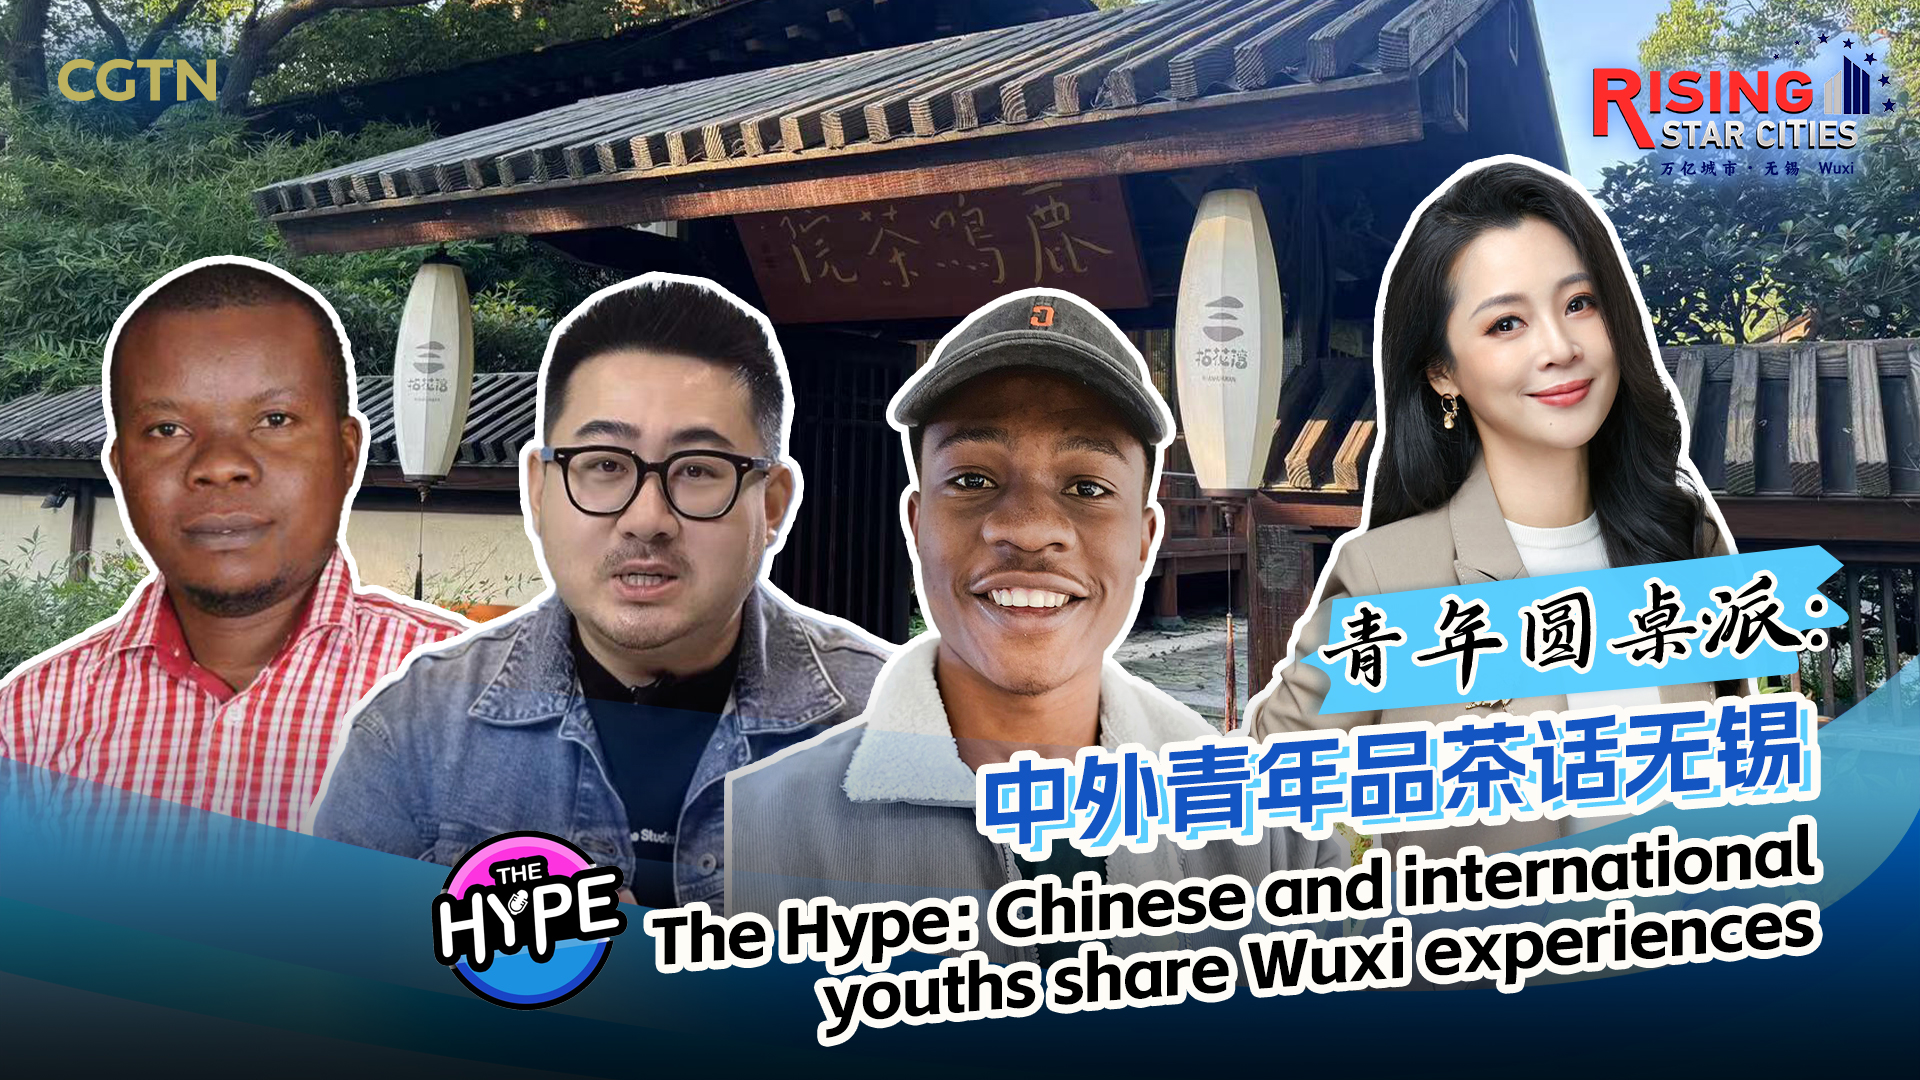 Live: Chinese, international youths share their Wuxi experience